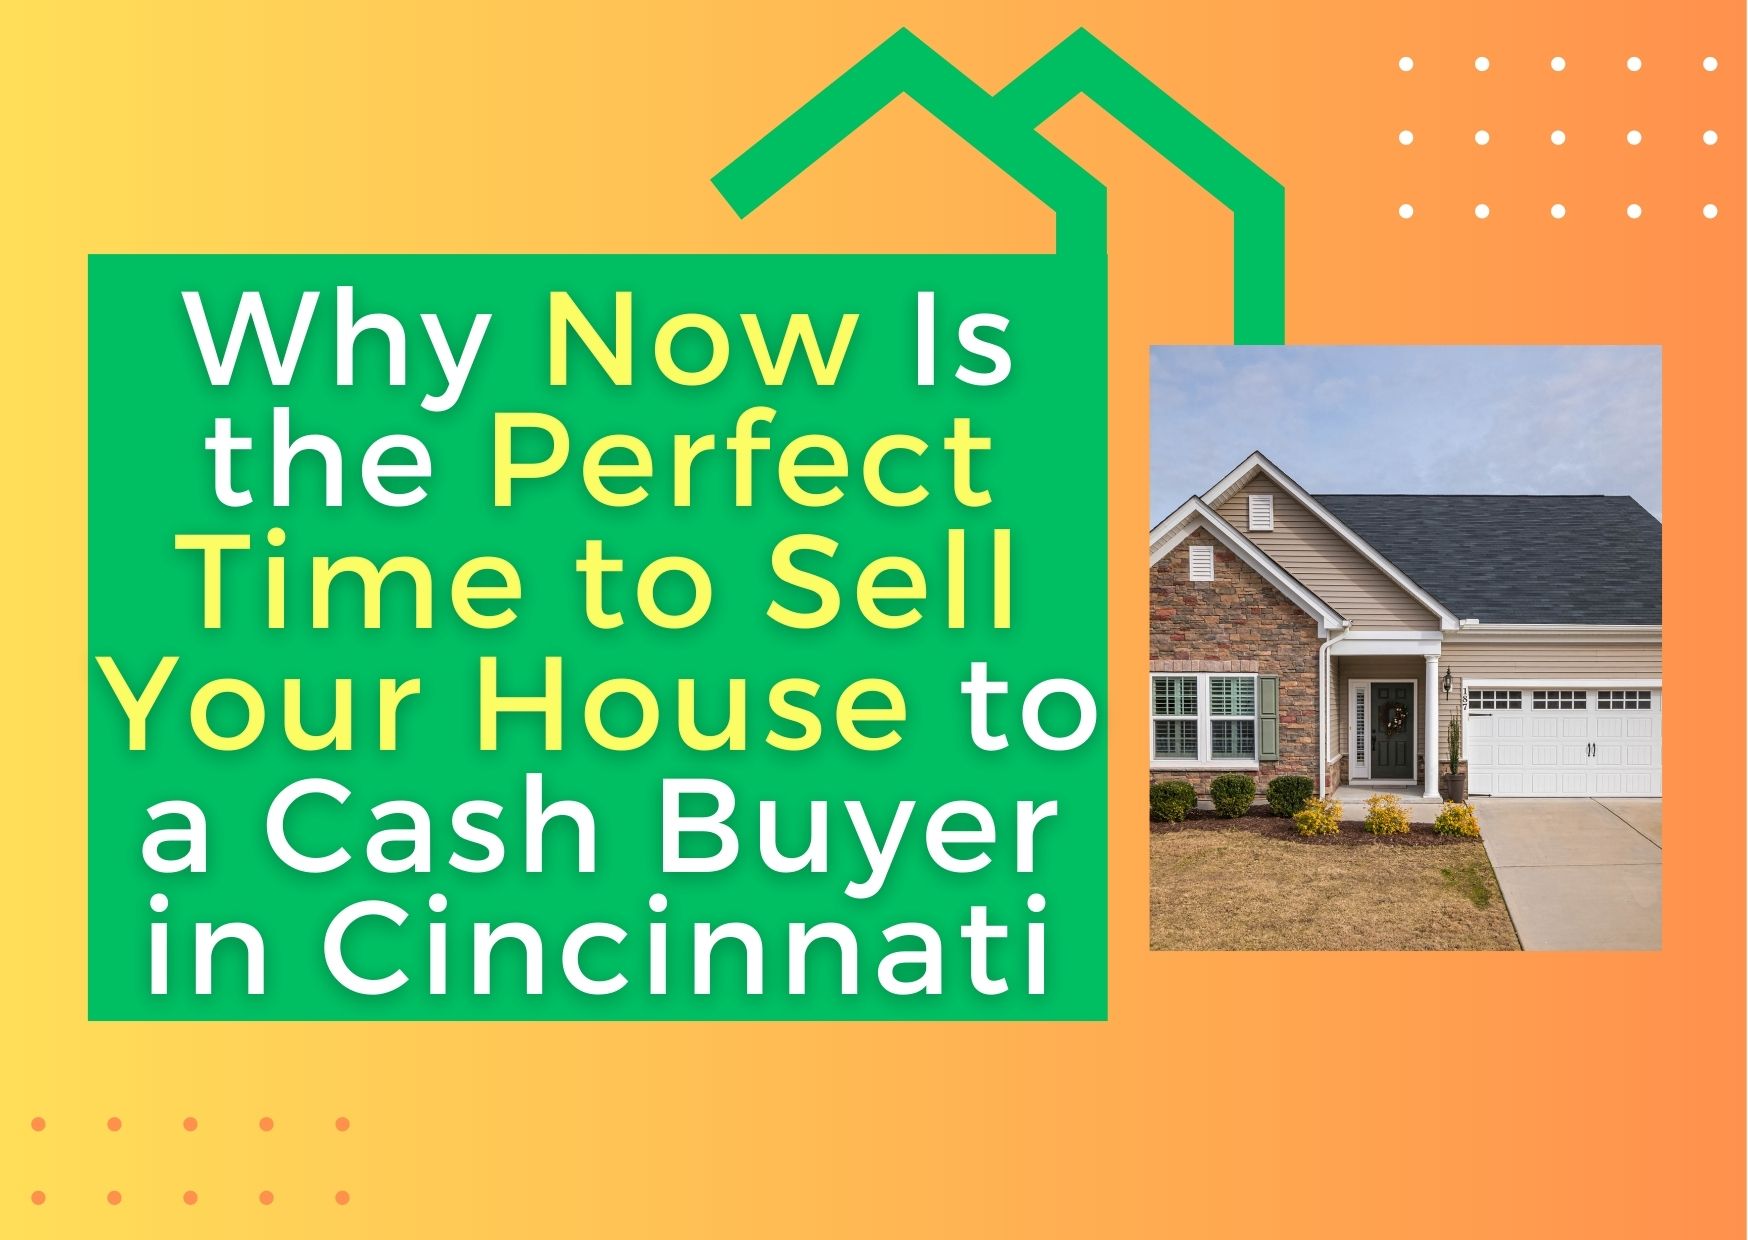 Sell Your House to a Cash Buyer in Cincinnati